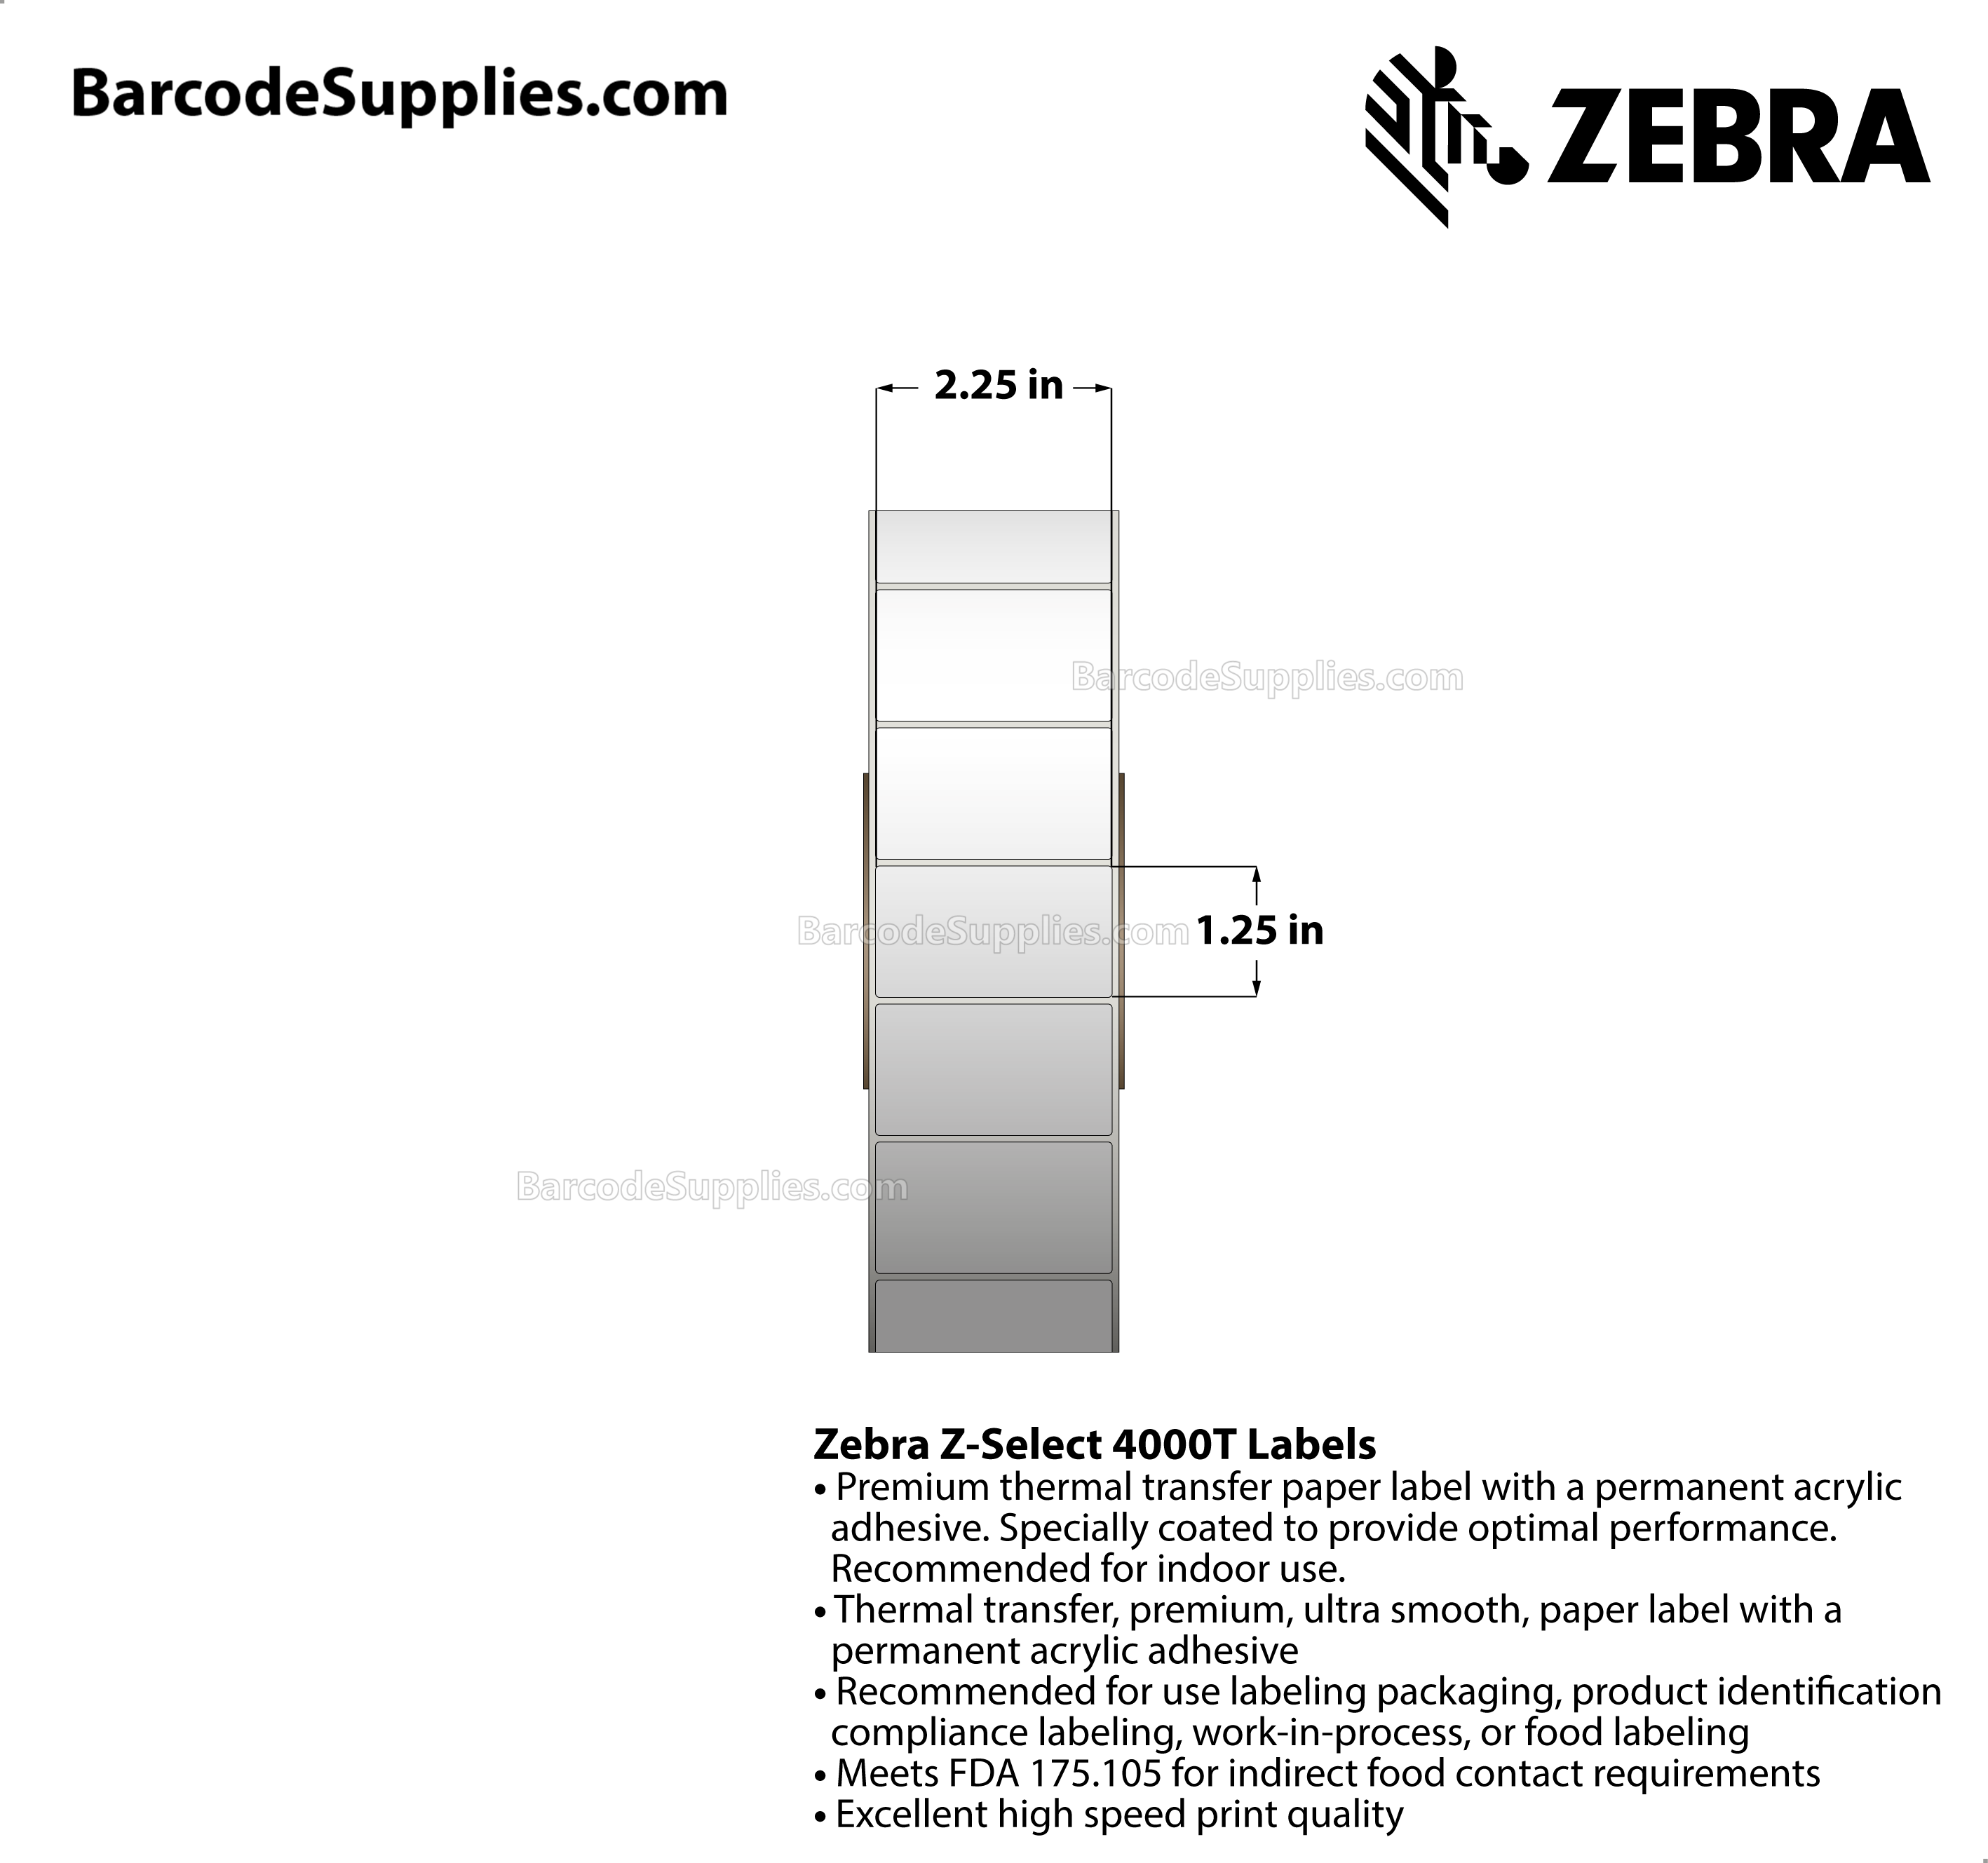 2.25 x 1.25 Thermal Transfer White Z-Select 4000T (No Perf) Labels With Permanent Adhesive - Not Perforated - 4240 Labels Per Roll - Carton Of 8 Rolls - 33920 Labels Total - MPN: 72283